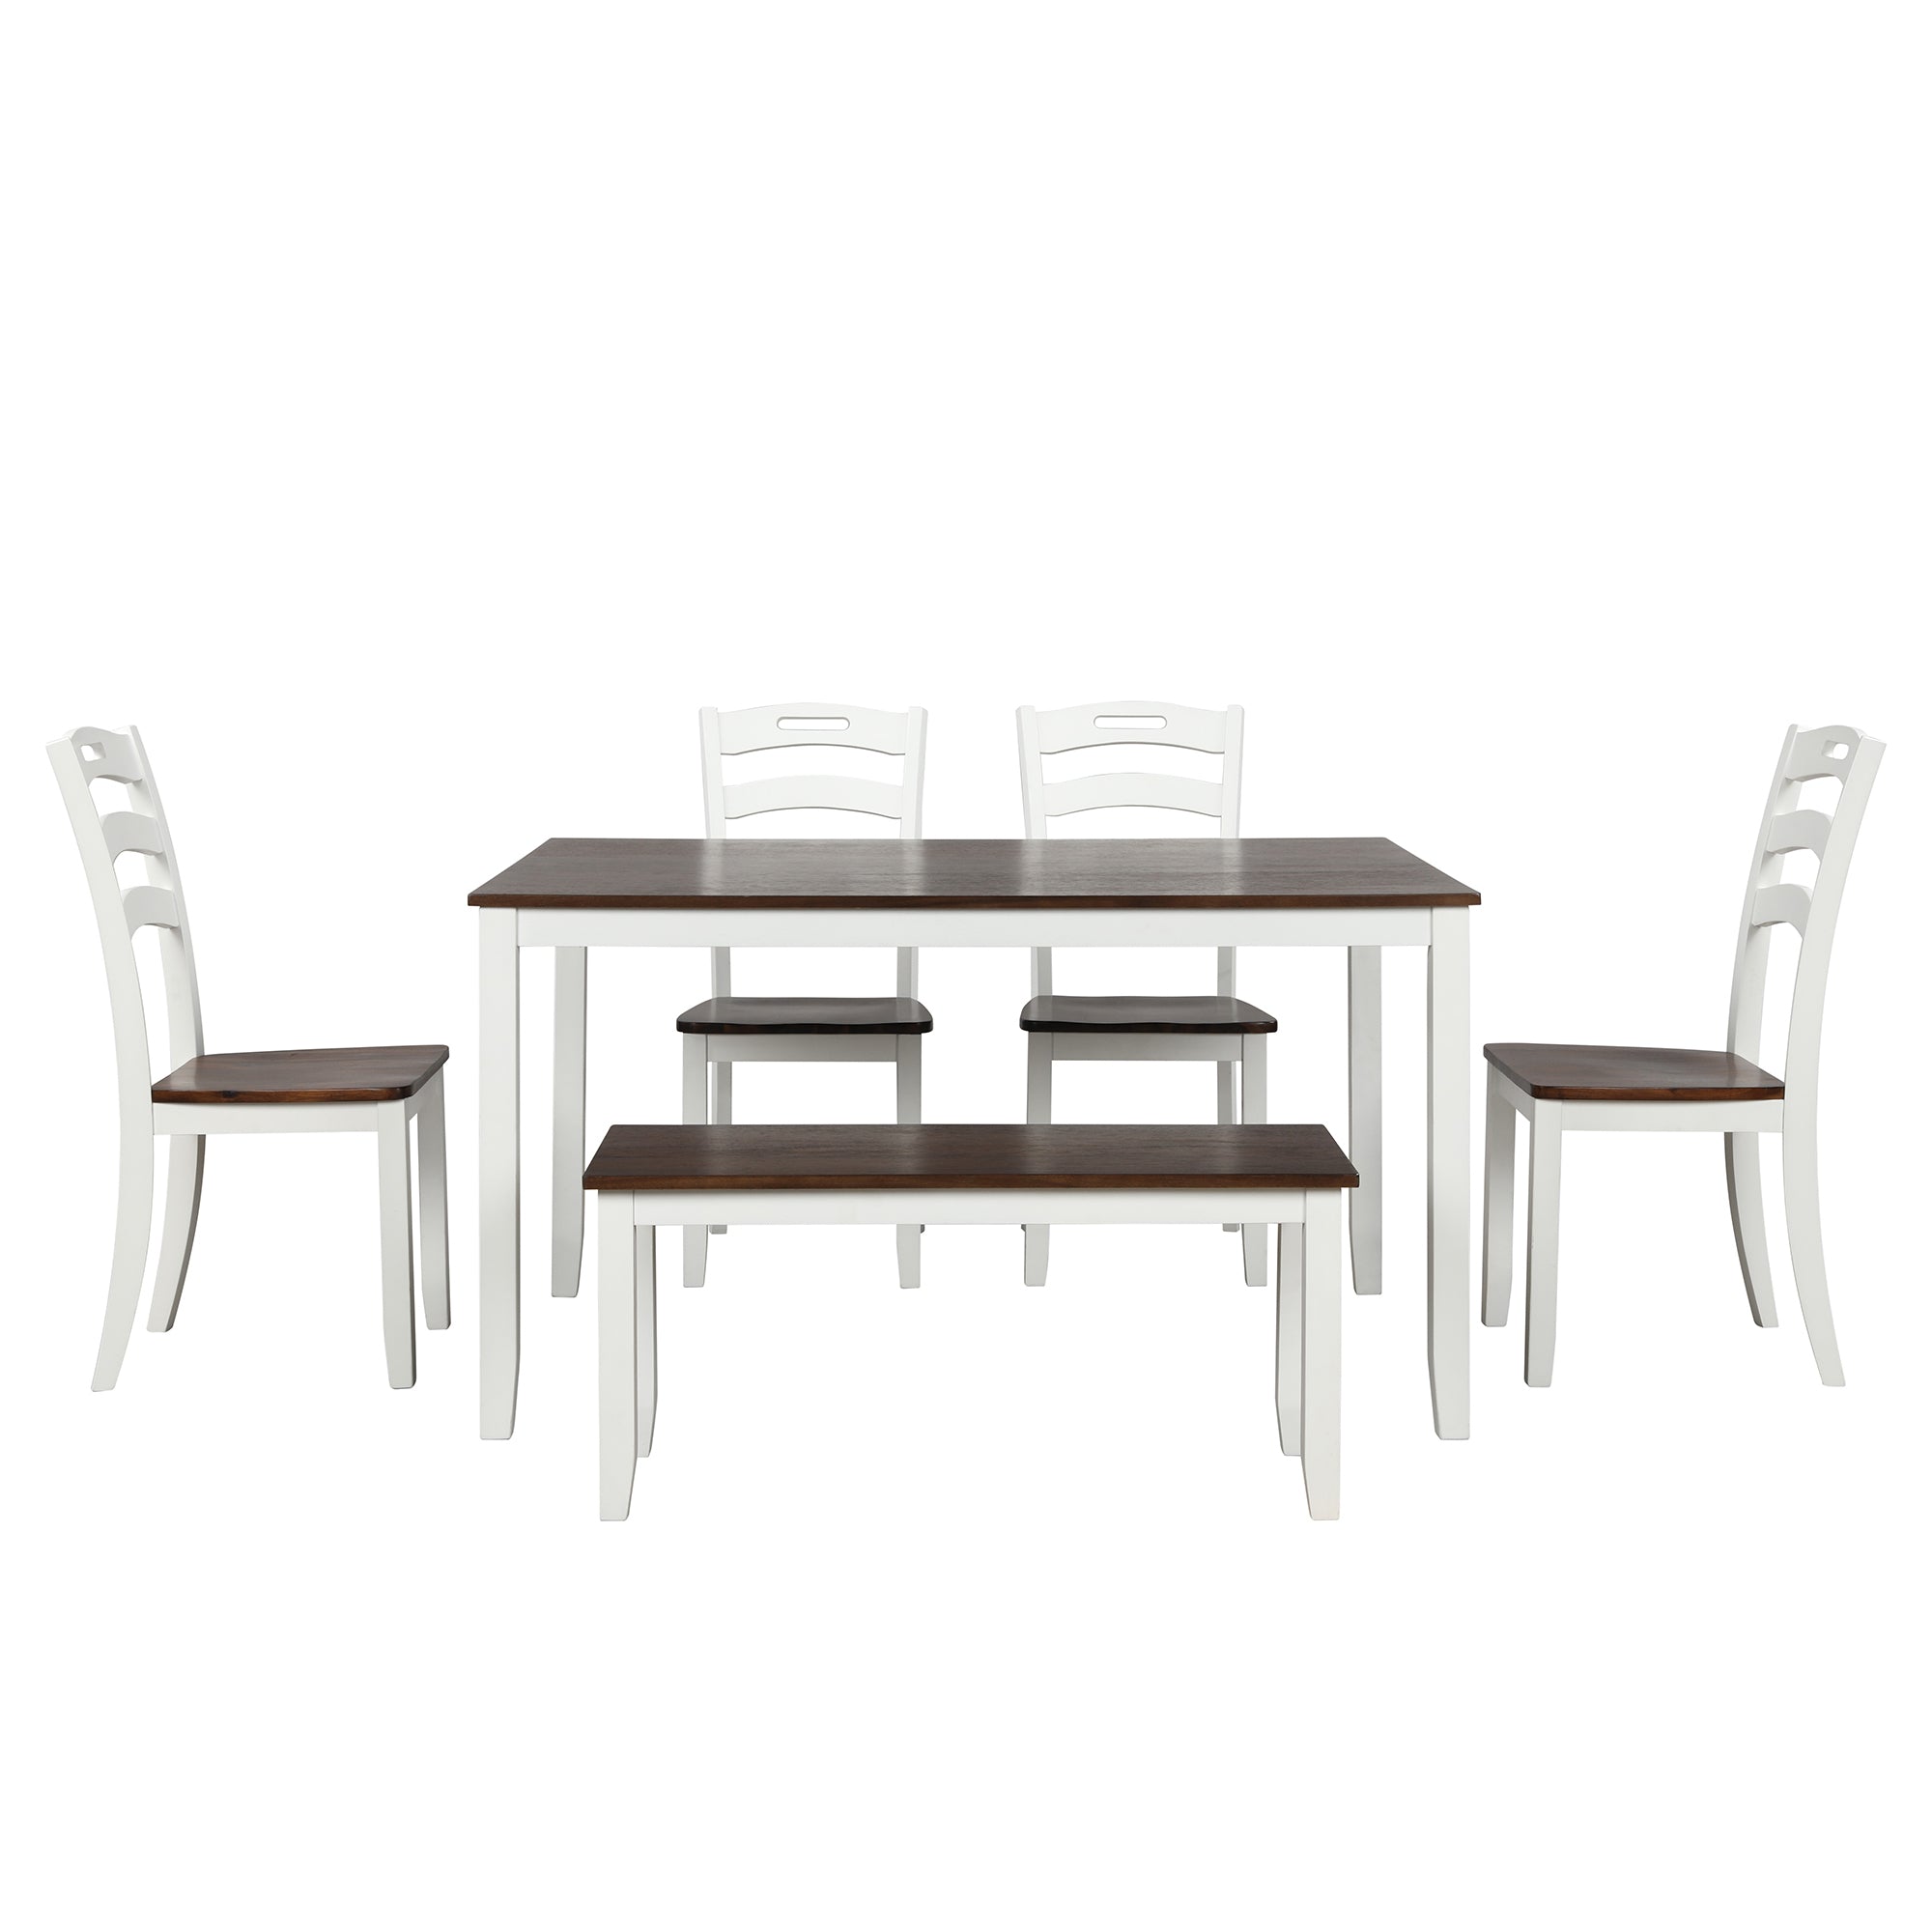 TOPMAX 6 Piece Dining Table Set with Bench, Table Set with Waterproof Coat (Ivory)